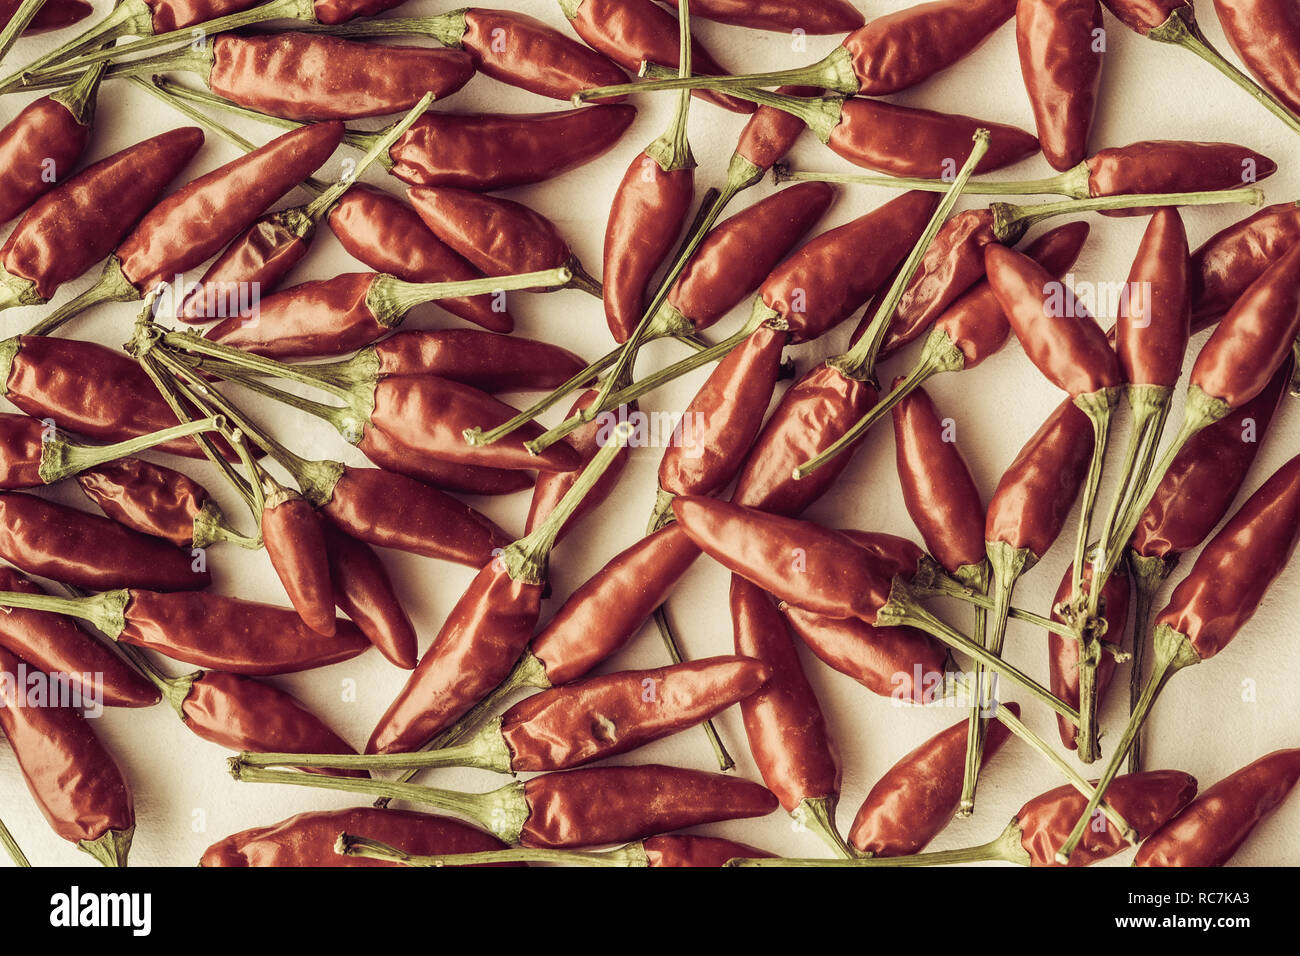 Vintage style shot of a texture of many red hot chili peppers Stock Photo